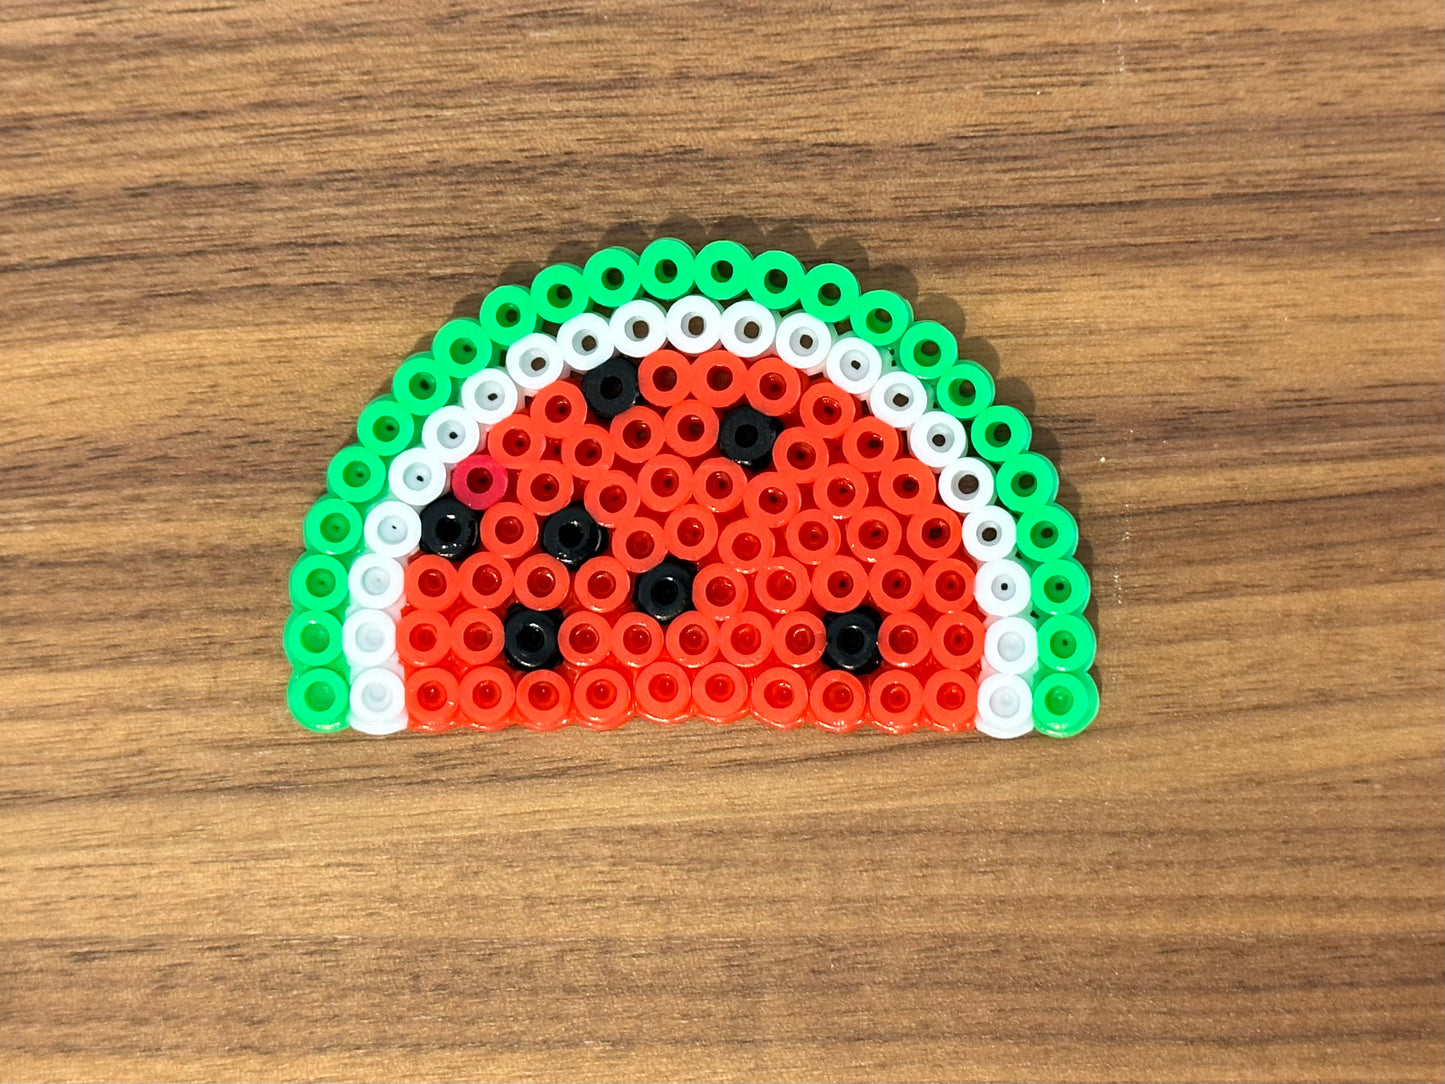 Check out our Watermelon Slice Beads